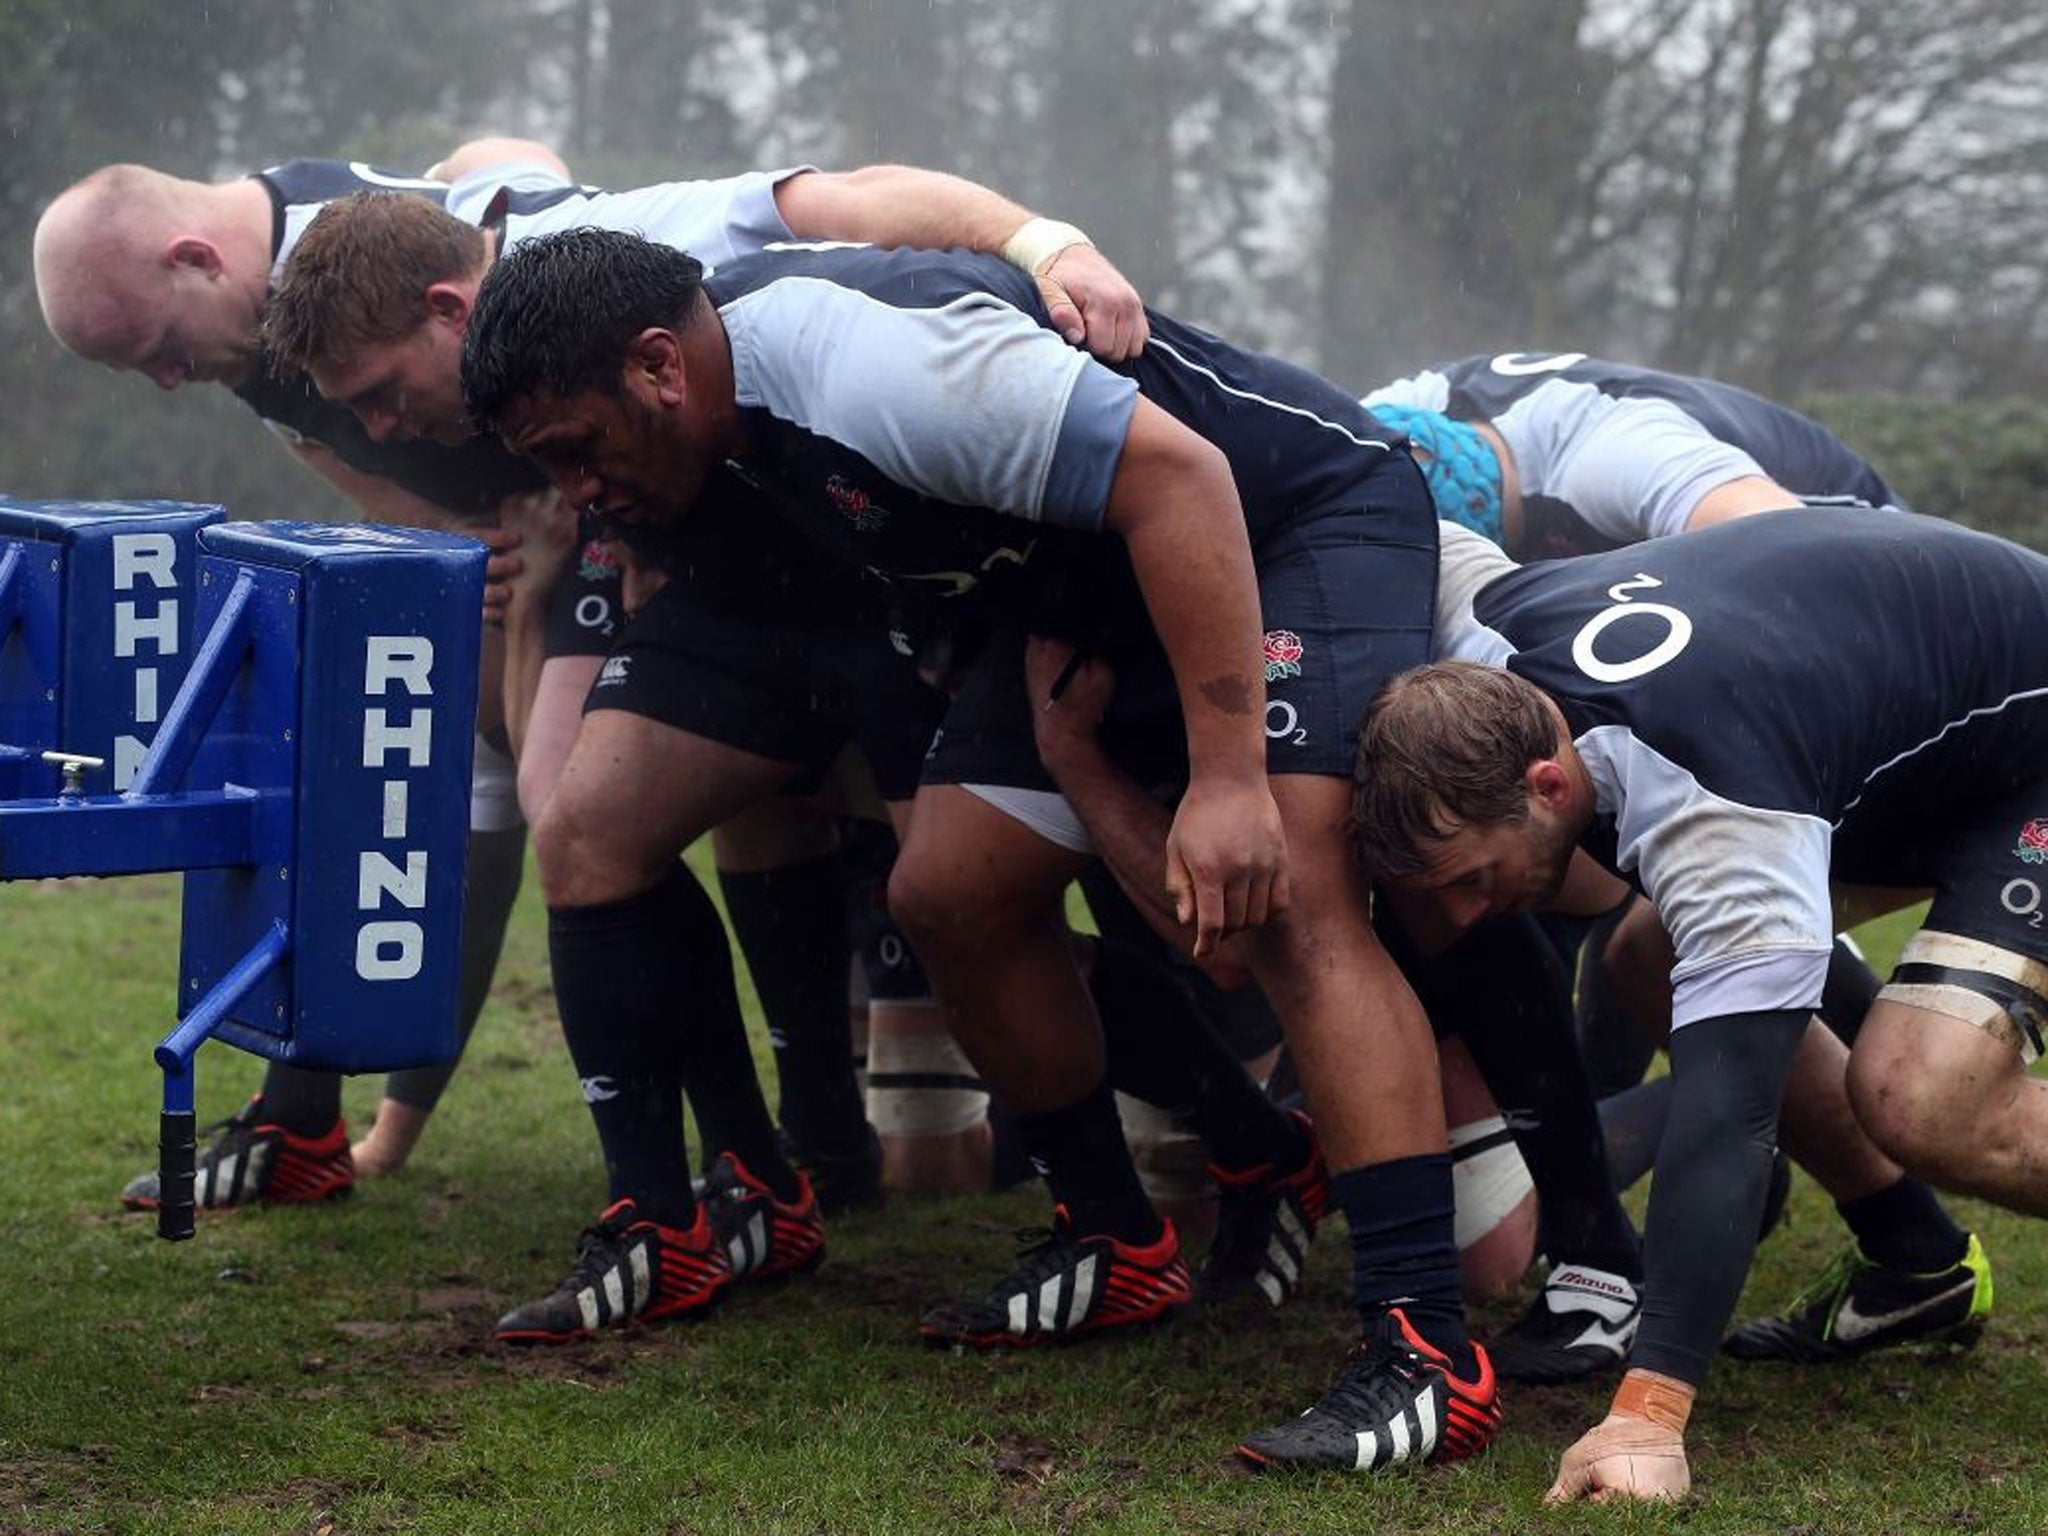 Final push: England’s scrum get in some practice ready for two of the most important games in this emerging team’s history